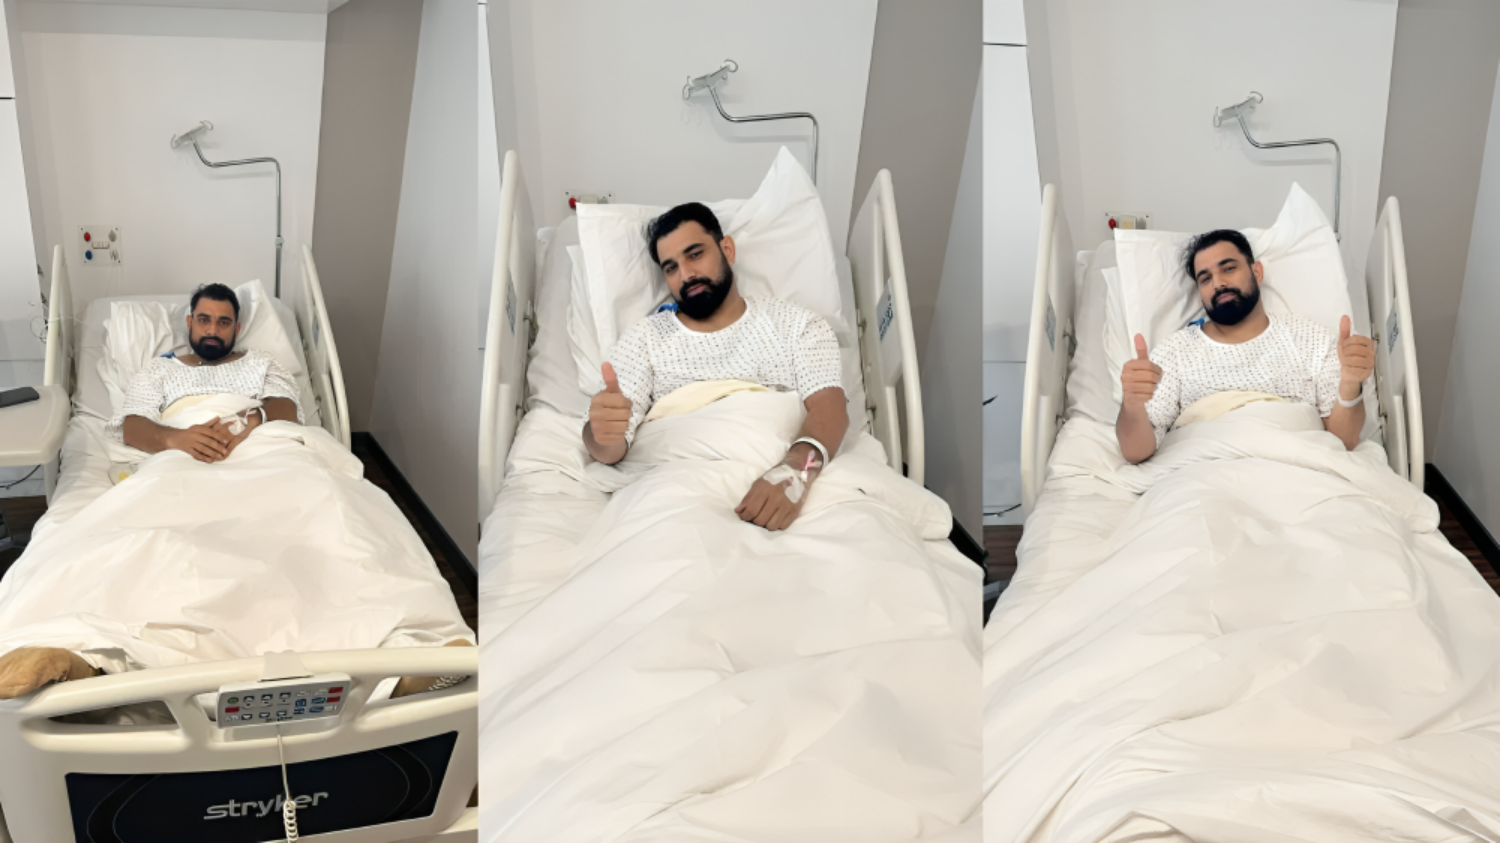 Fast bowler Mohammad Shami undergoes surgery, see photo posted from hospital की तस्वीर